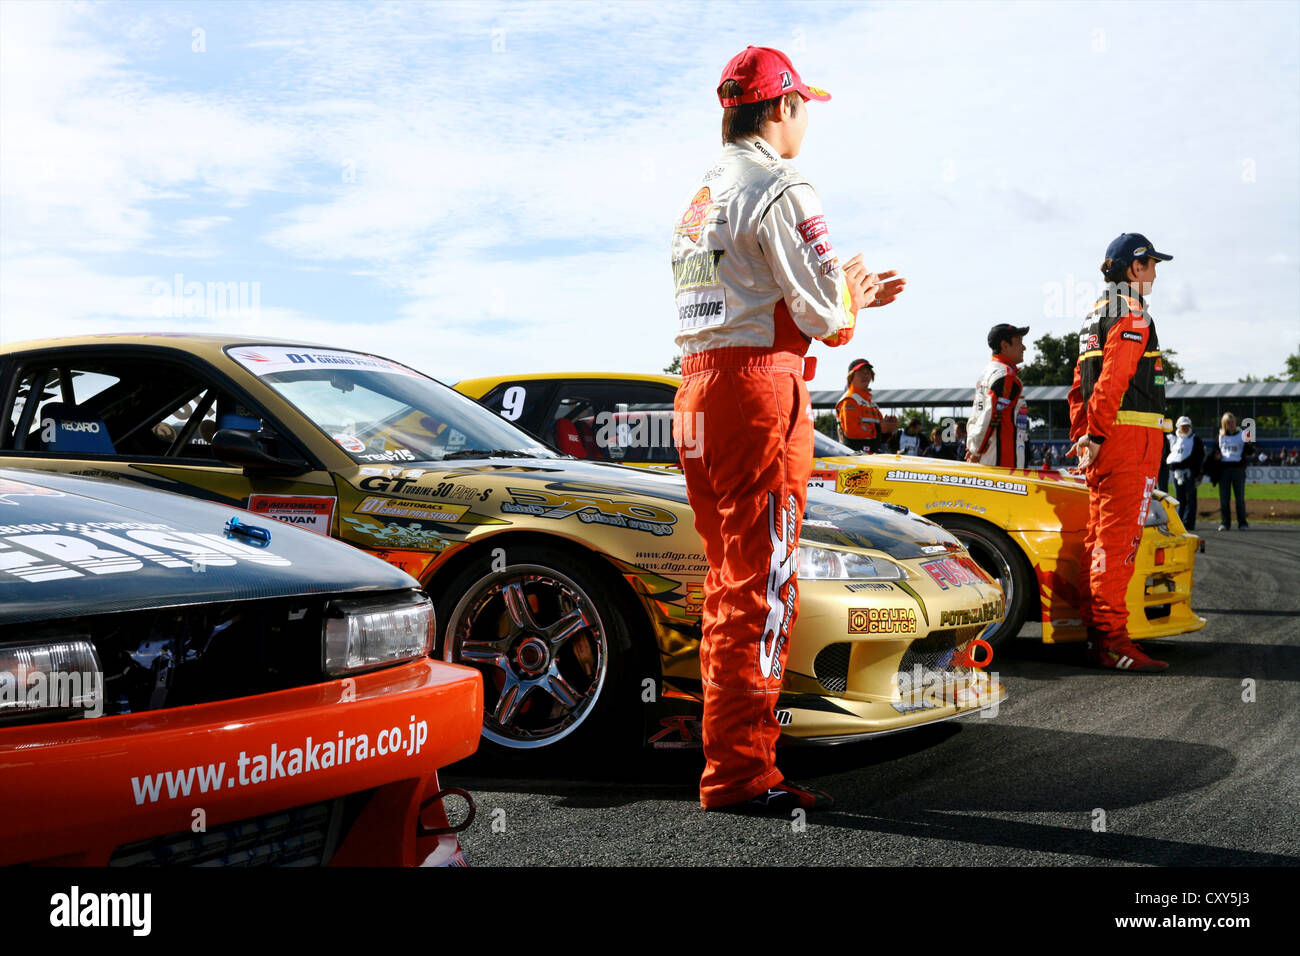 Drift cars lined up with drivers on track Stock Photo